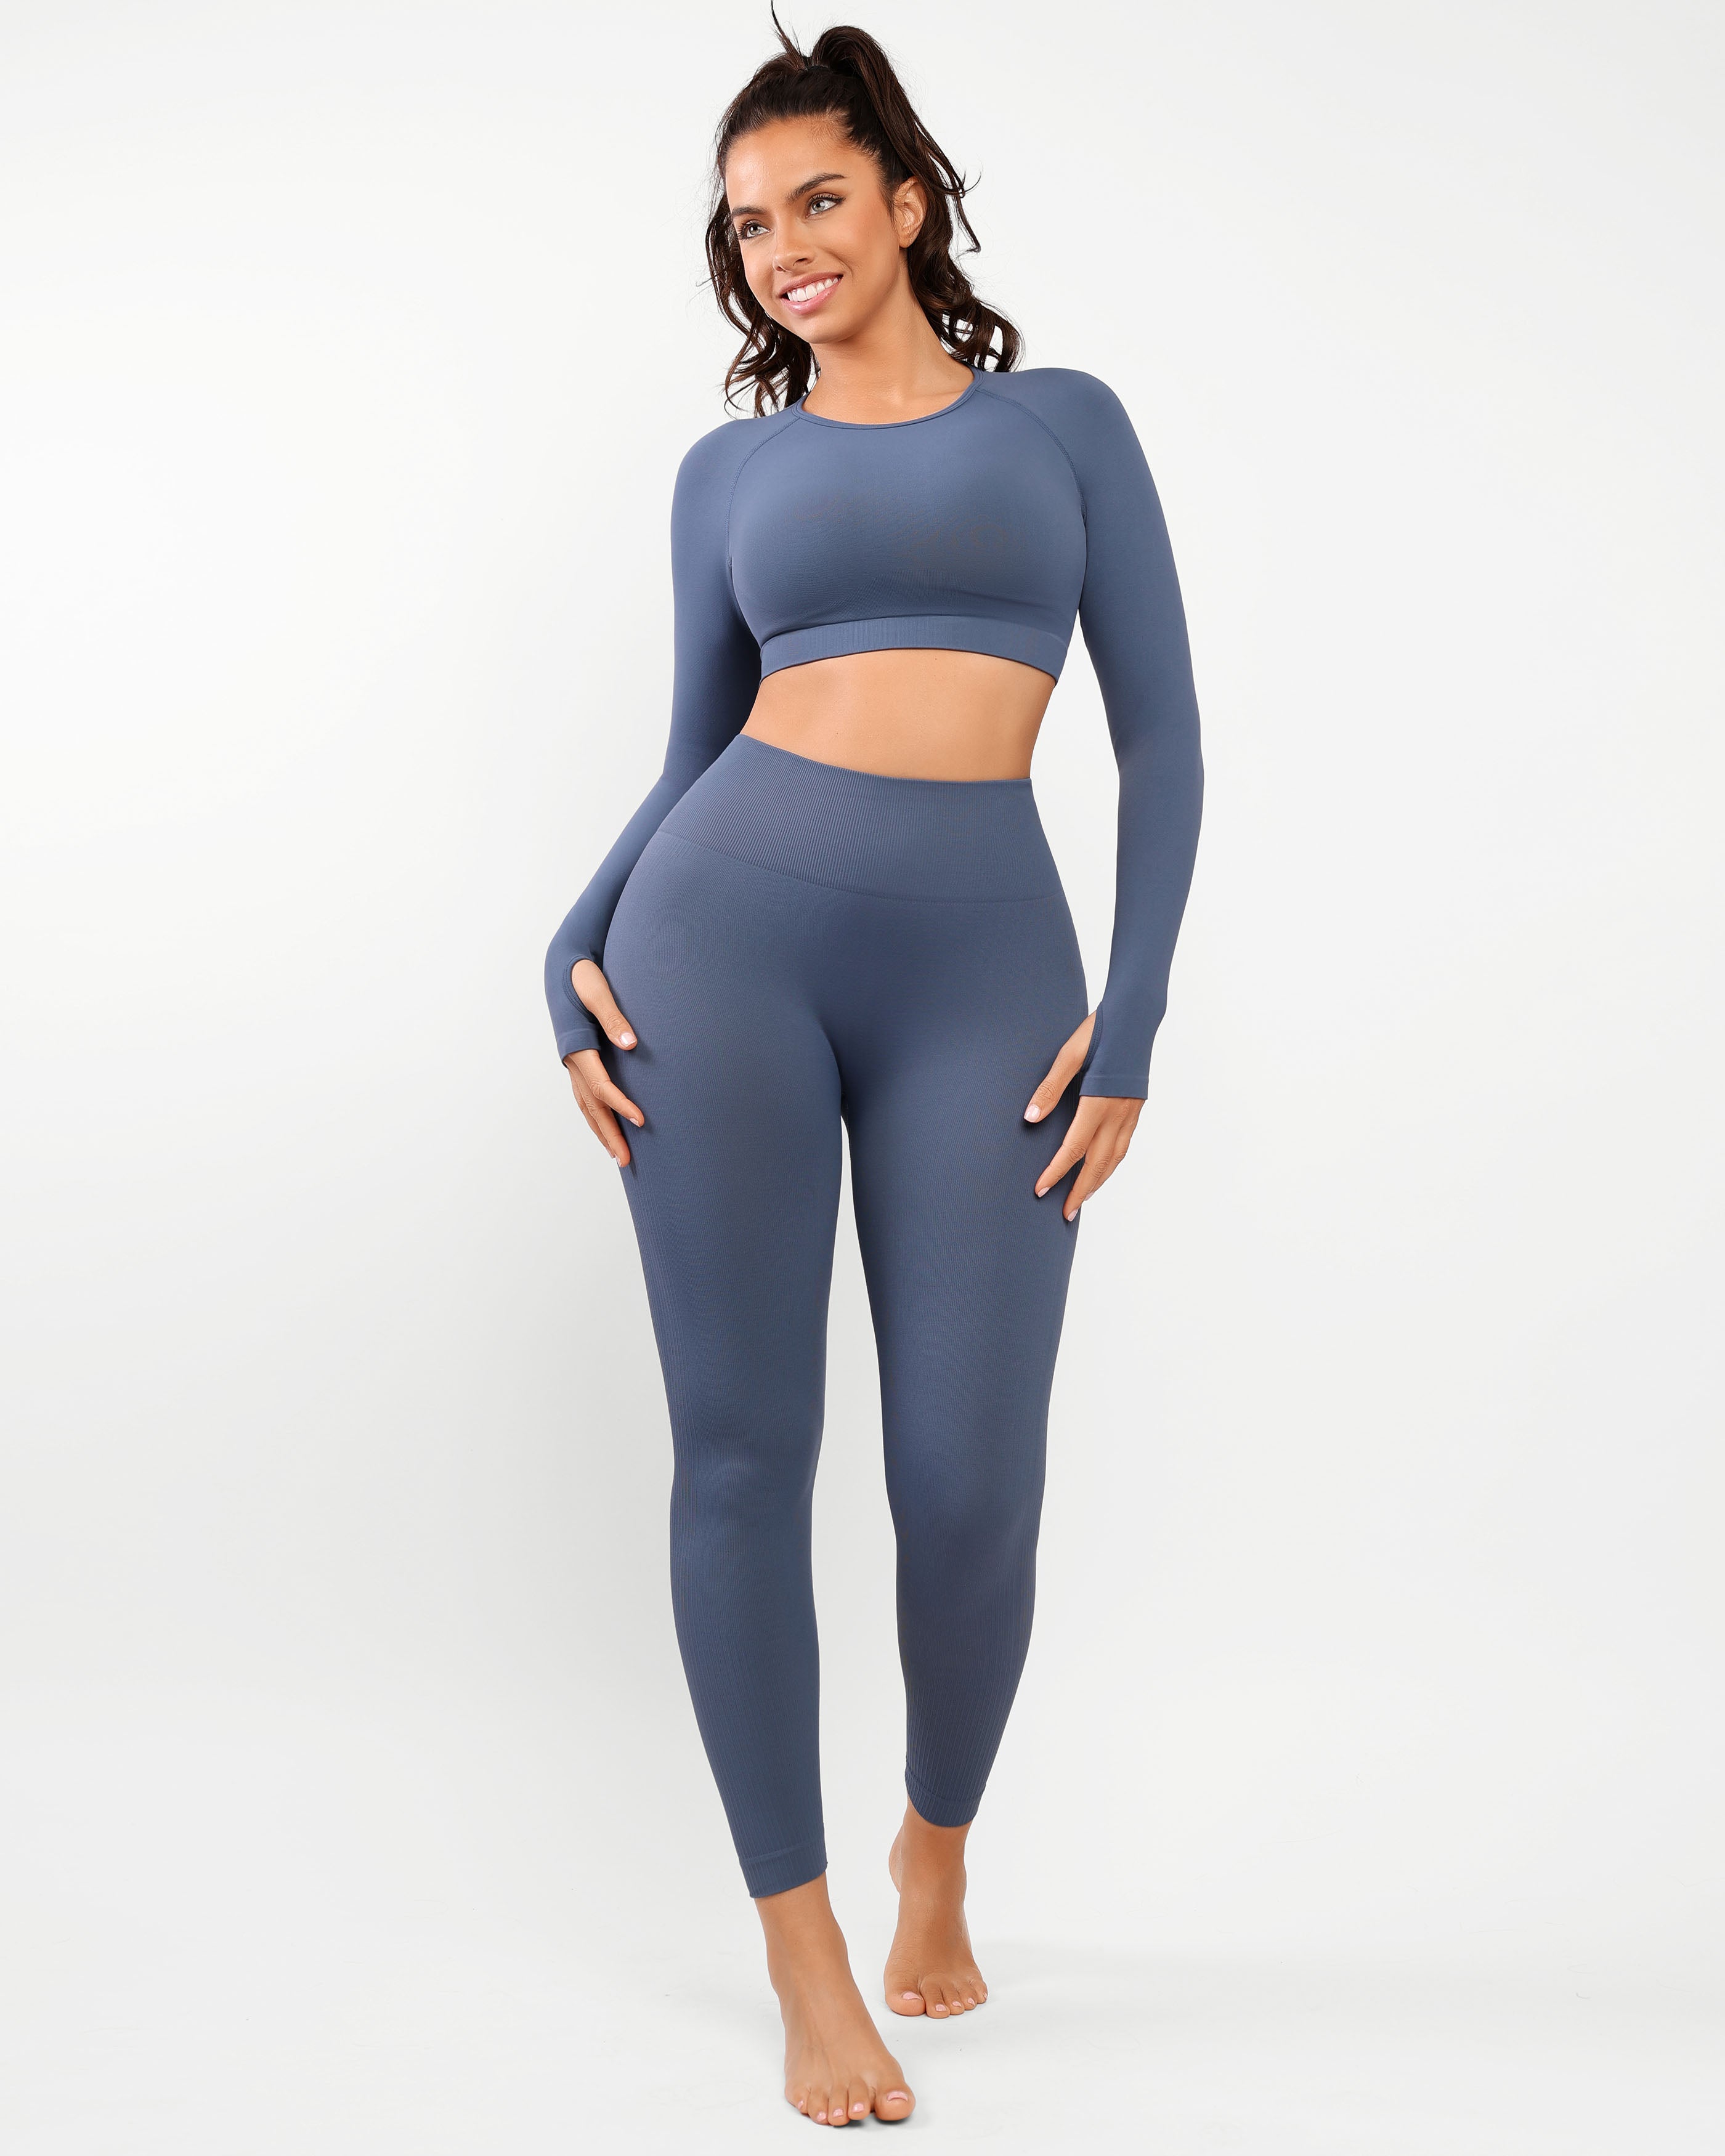 Are you in search for the perfect activewear set ? COSMOLLE has the p